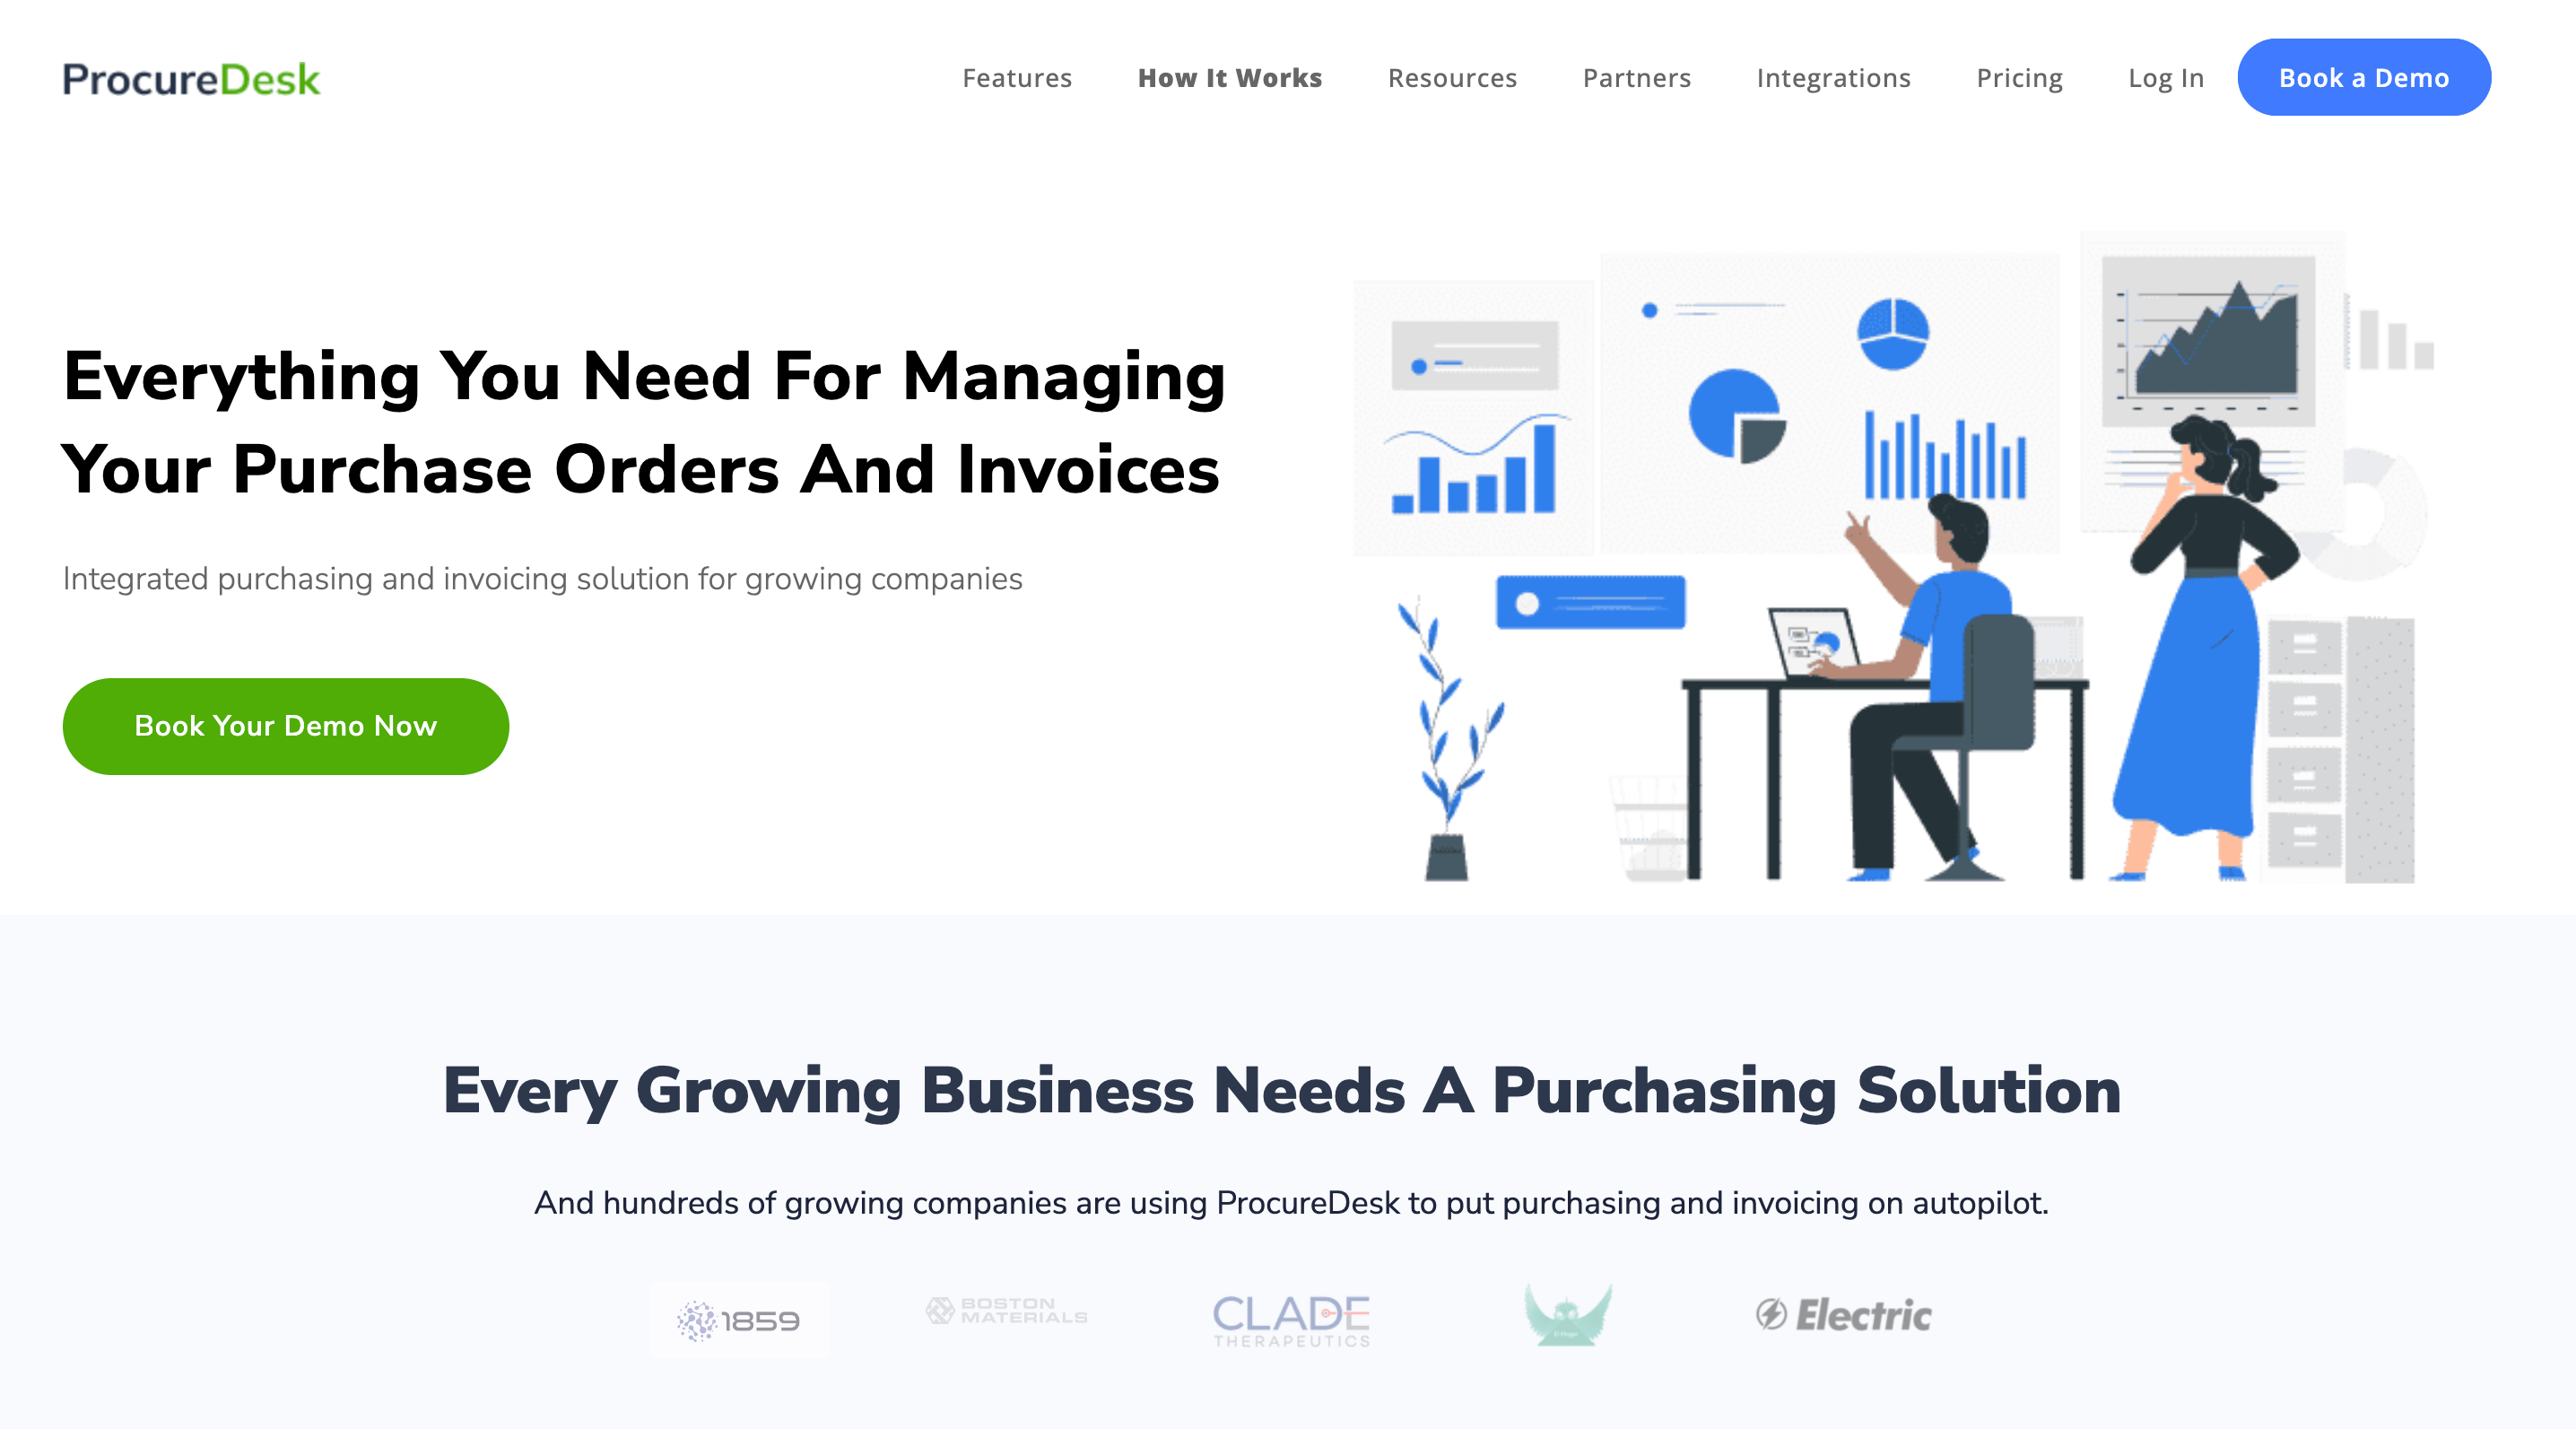 ProcureDesk: How It Works - Everything You Need for Managing Your Purchase Orders and Invoices